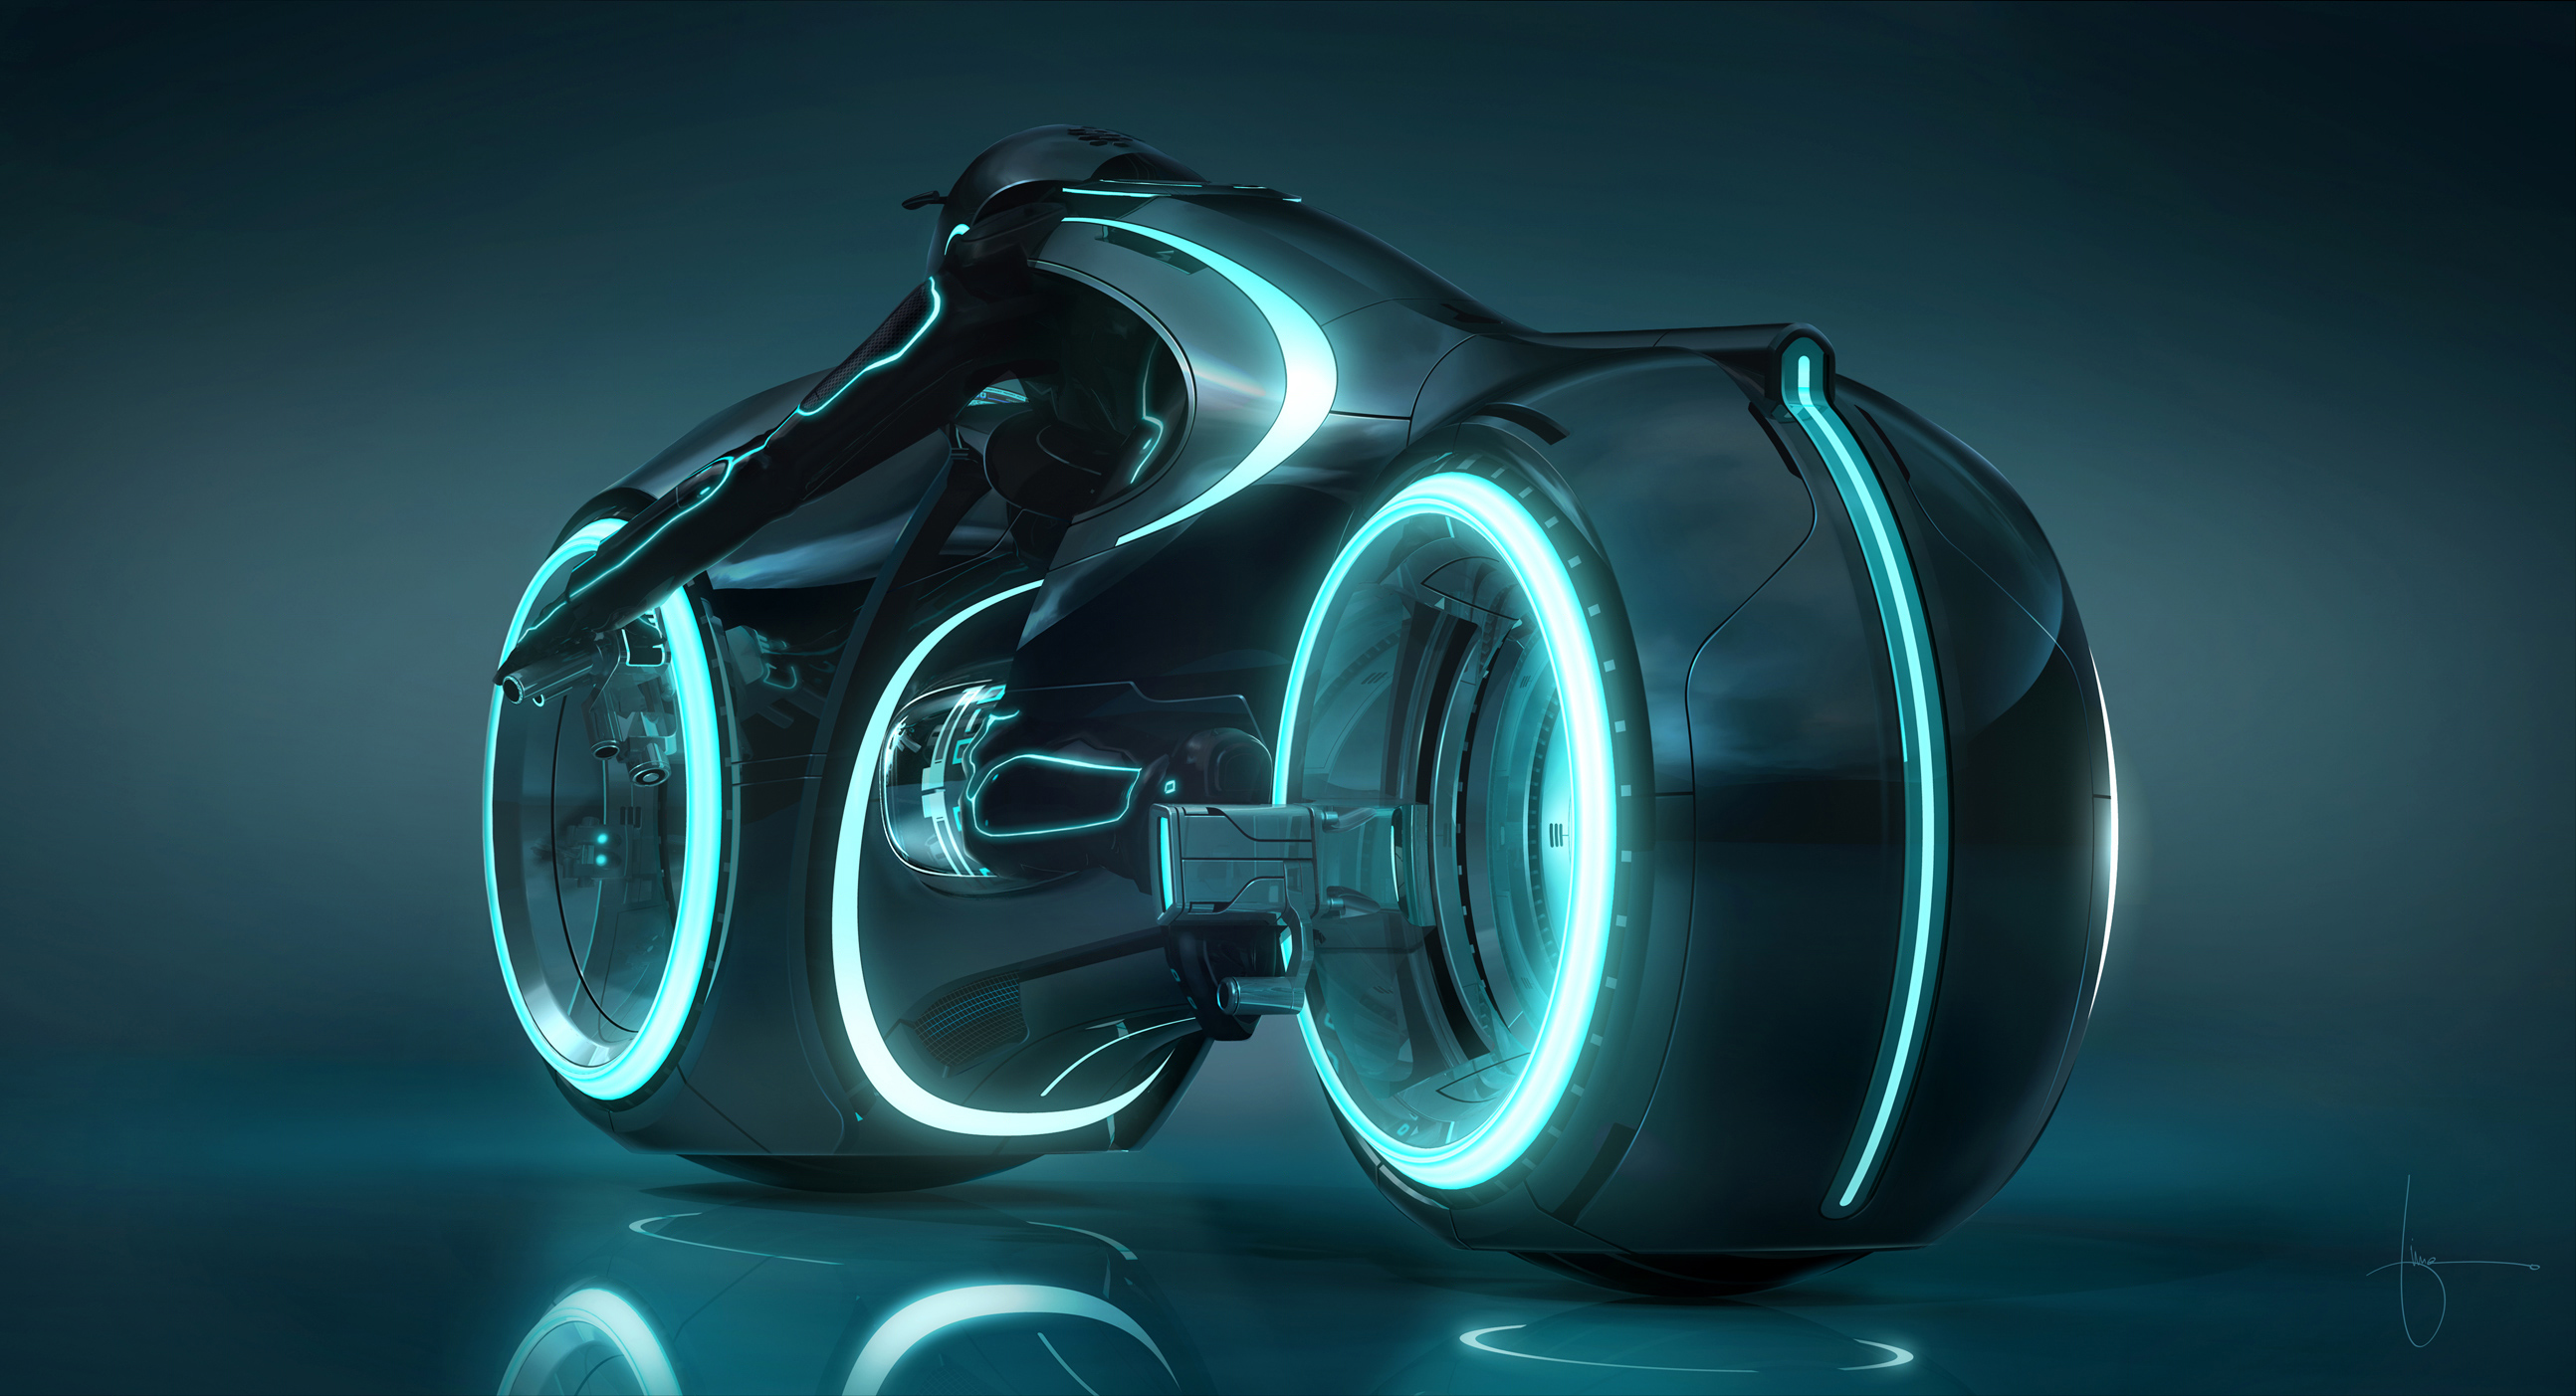 Free Download Awesome Tronlegacy Wallpapers Movie Wallpapers 25x1403 For Your Desktop Mobile Tablet Explore 67 Tron Hd Wallpaper Tron Wallpapers Tron Lamborghini Wallpaper Tron Wallpaper 4k